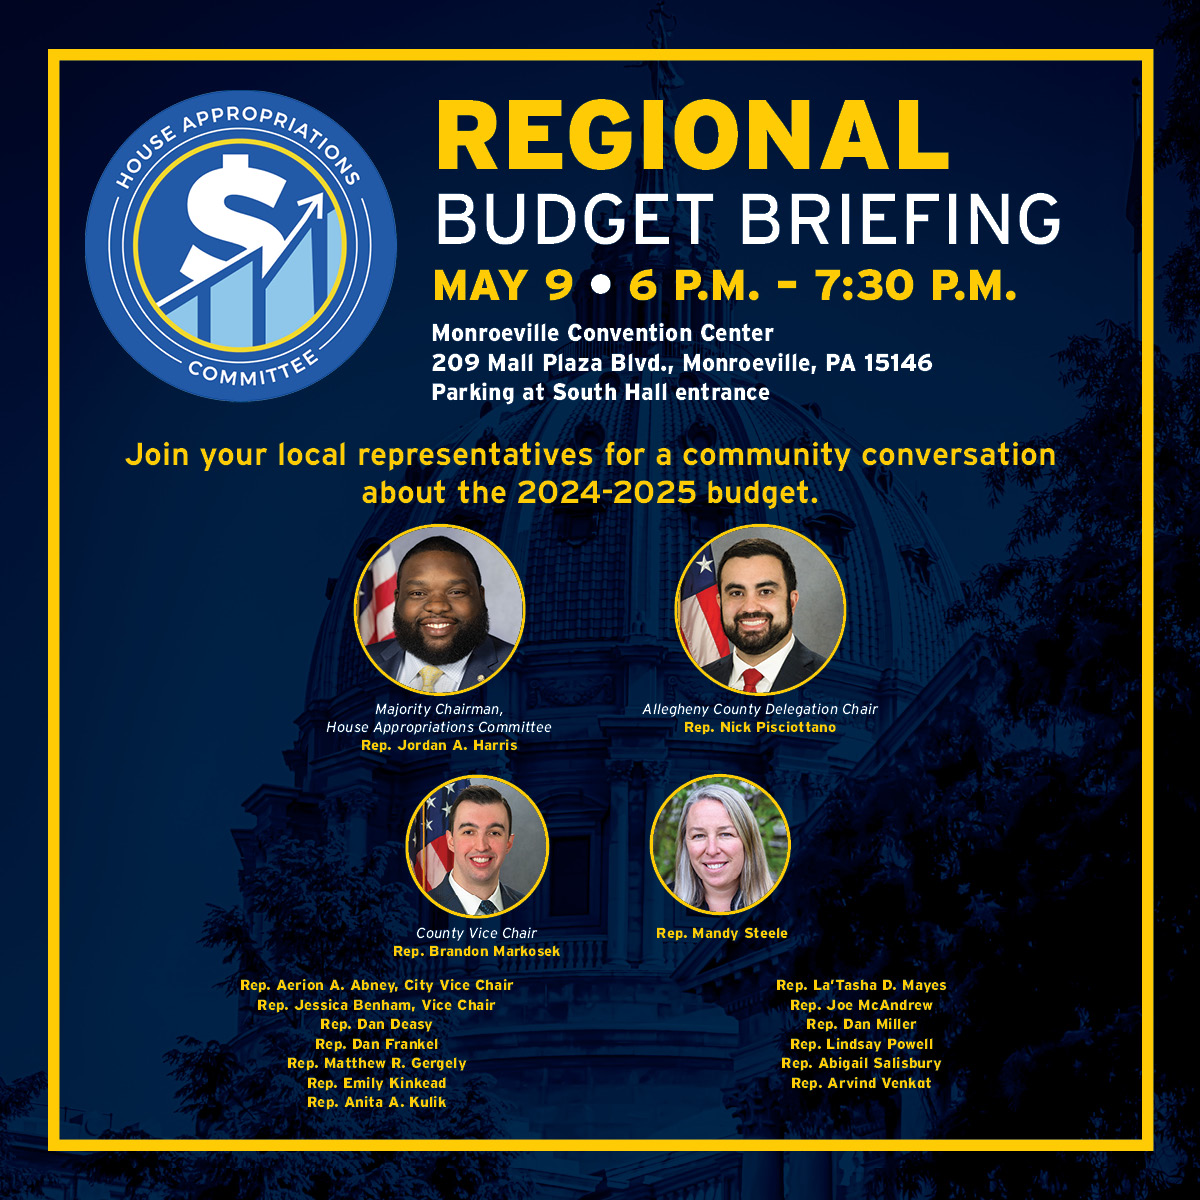 Interested in learning about the next state budget? Join me tomorrow at the Monroeville Convention Center for a regional budget briefing with @PA_HouseApprops Chairman @RepHarris and the @ACDelegation.